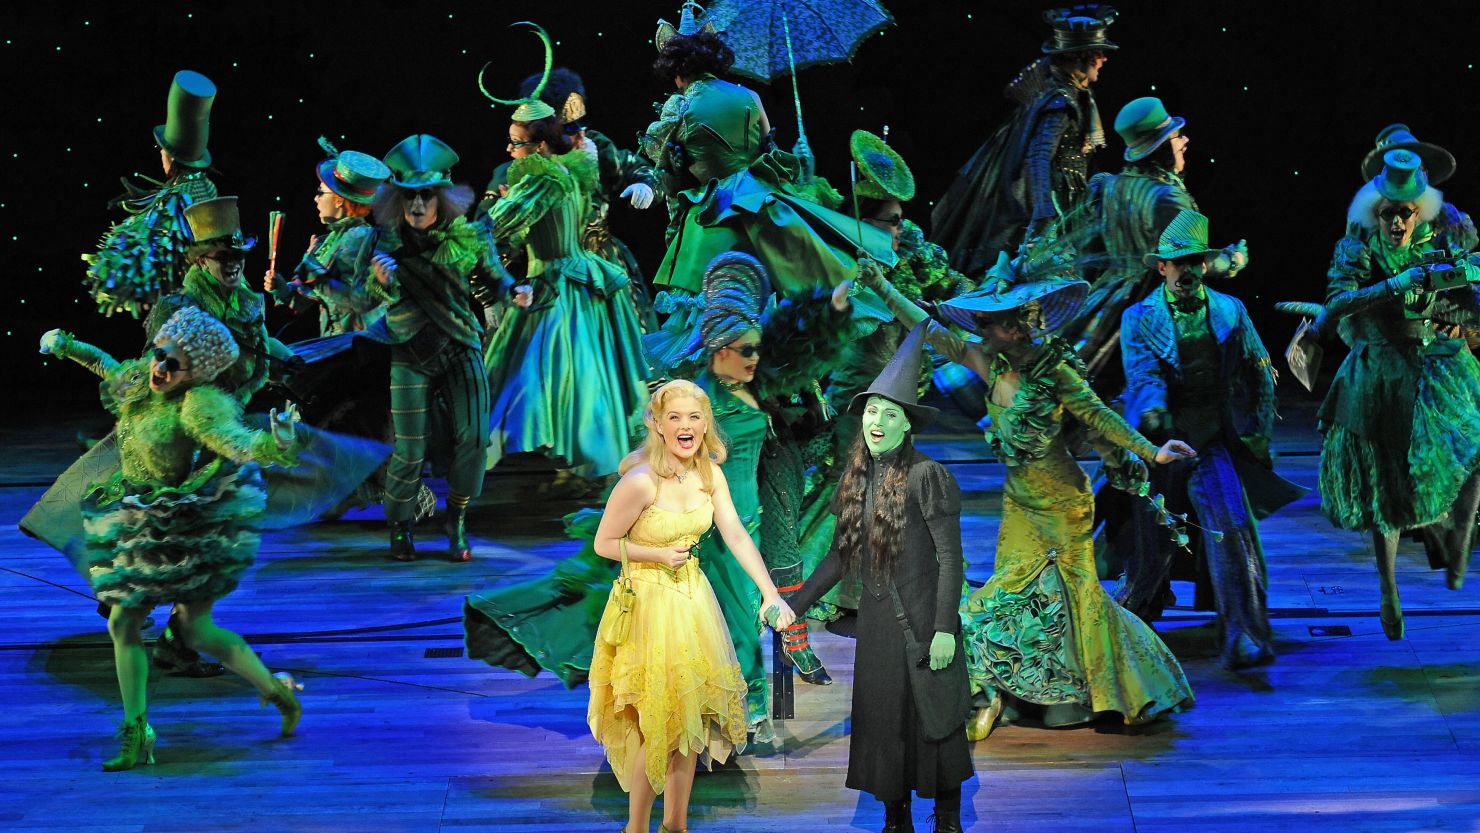 Lucy Durack as Glinda and Amanda Harrison as Elphaba in "Wicked" in Sydney in 2009.